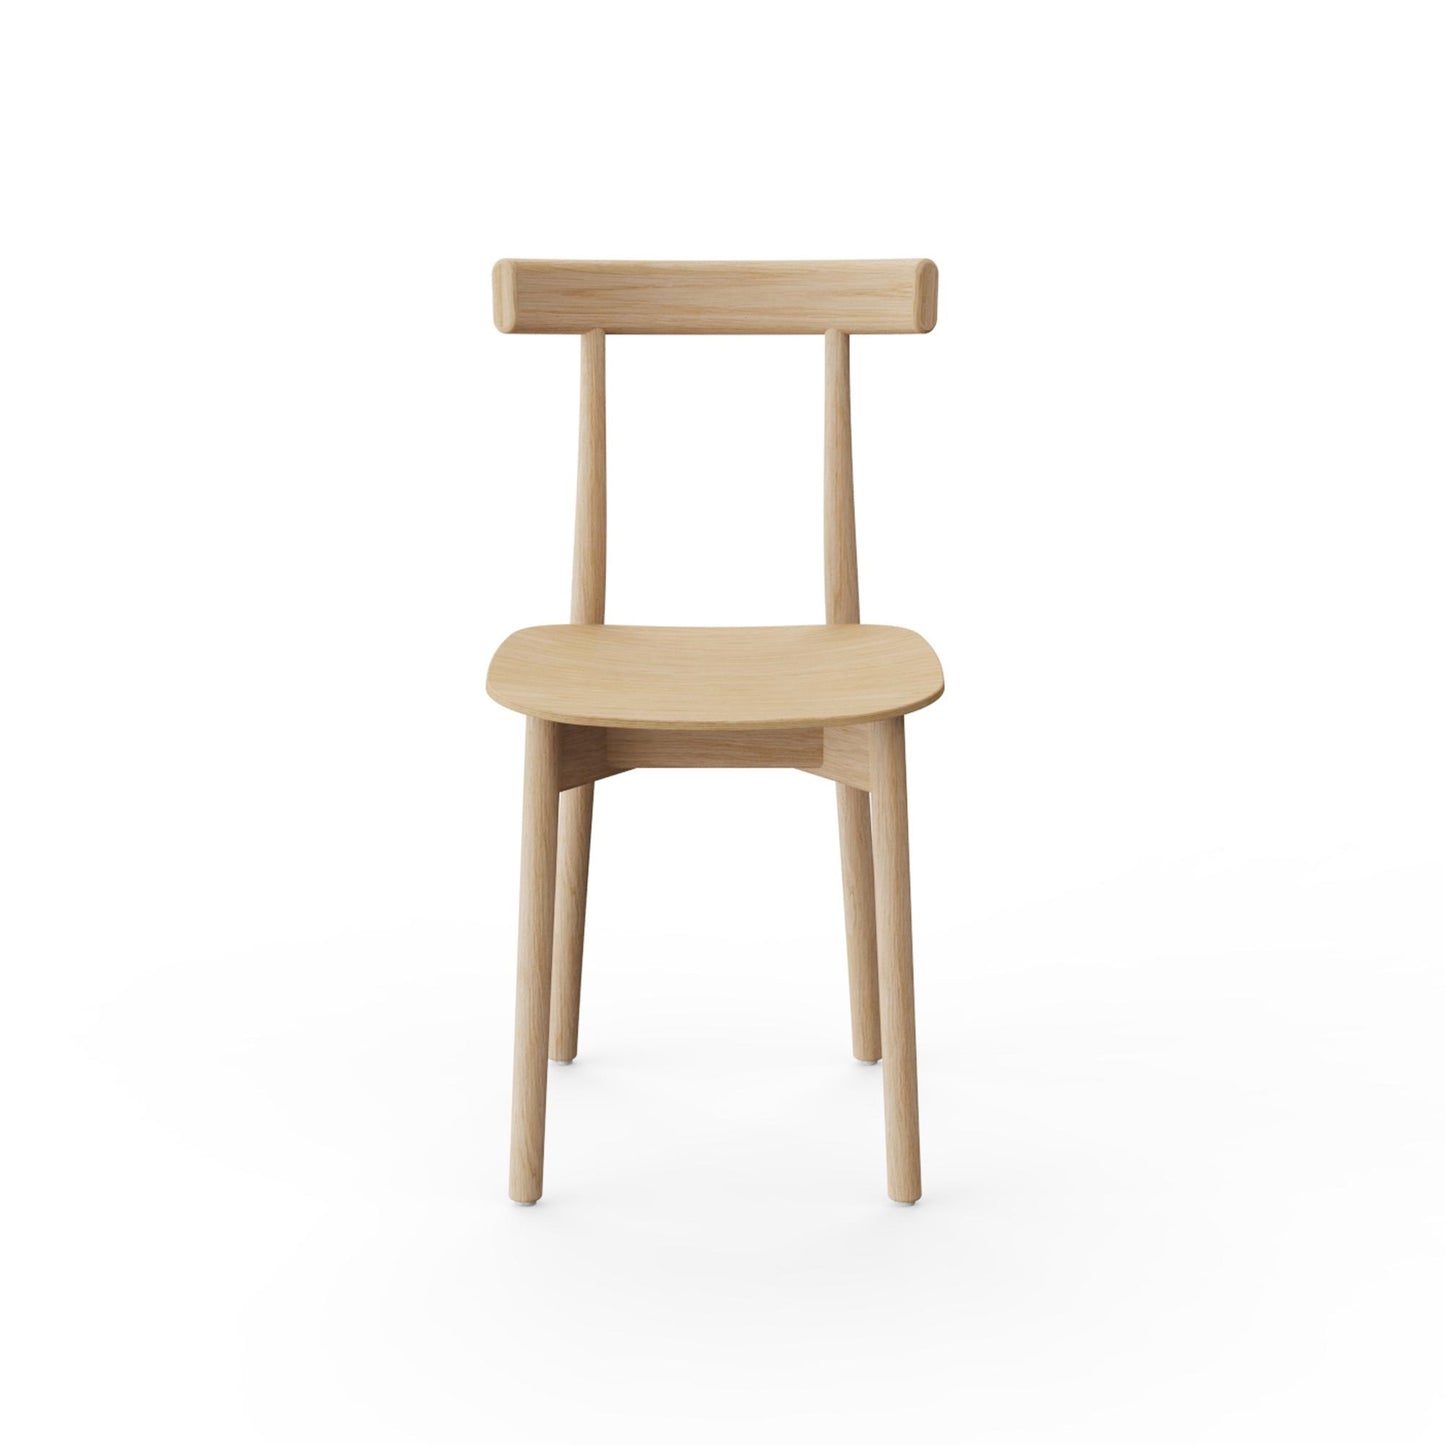 Skinny Wooden Dining Chair by NINE #Natural Oak